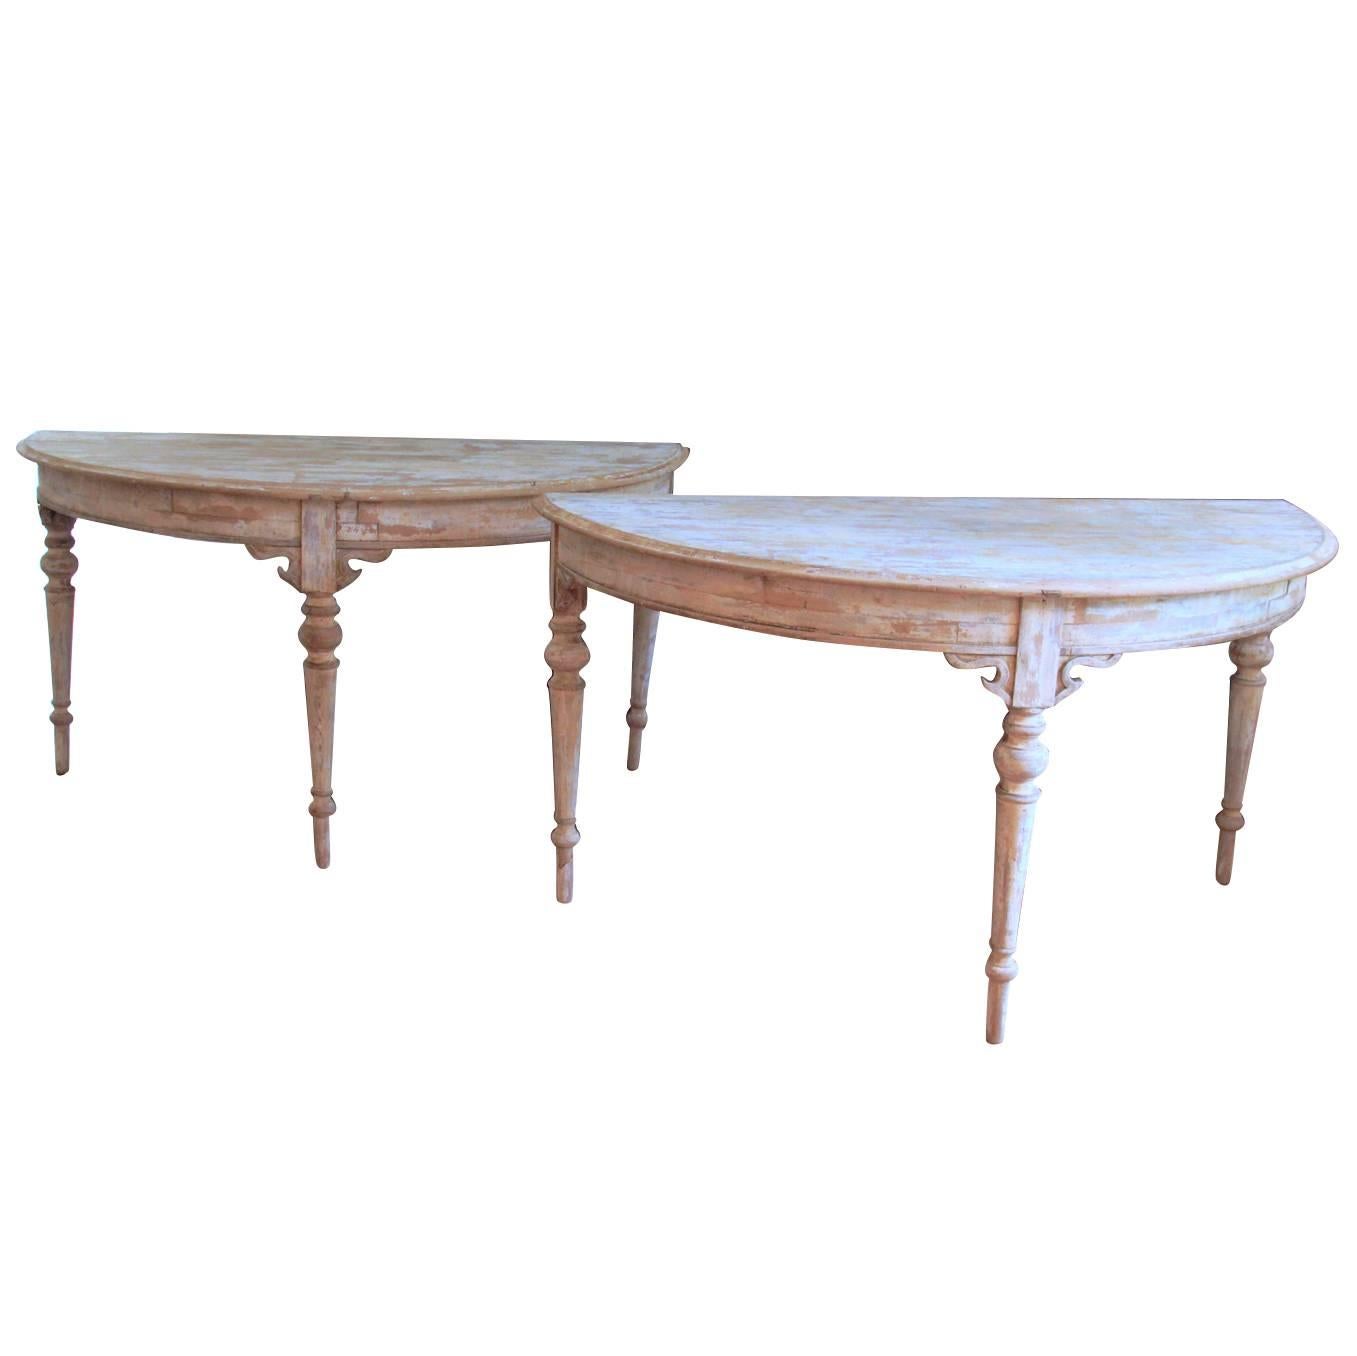 French Pair of Large Demilune Console Tables in Original Paint, 19th Century